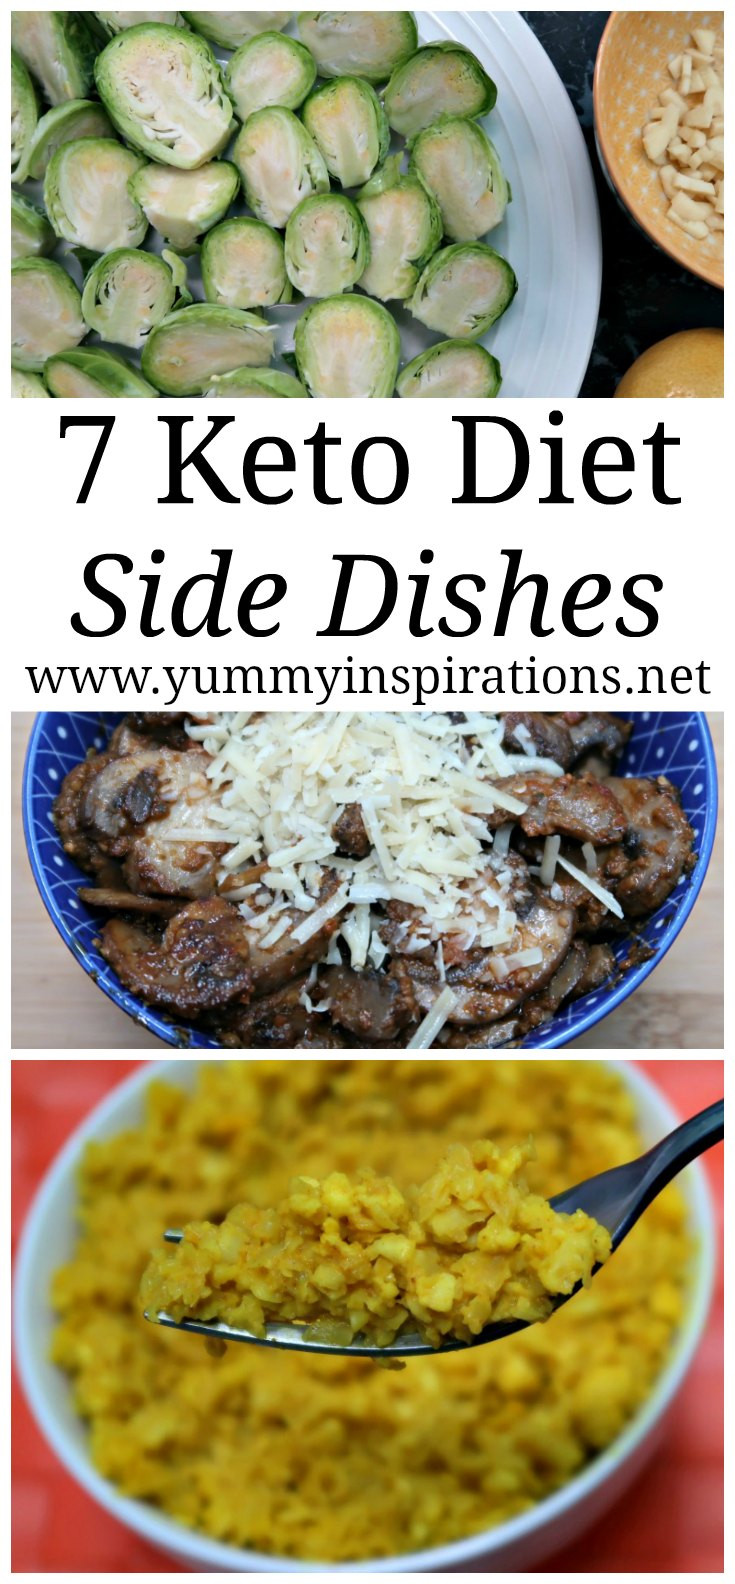 Low Carb Side Dishes
 7 Keto Side Dishes Easy Low Carb Sides LCHF Recipes